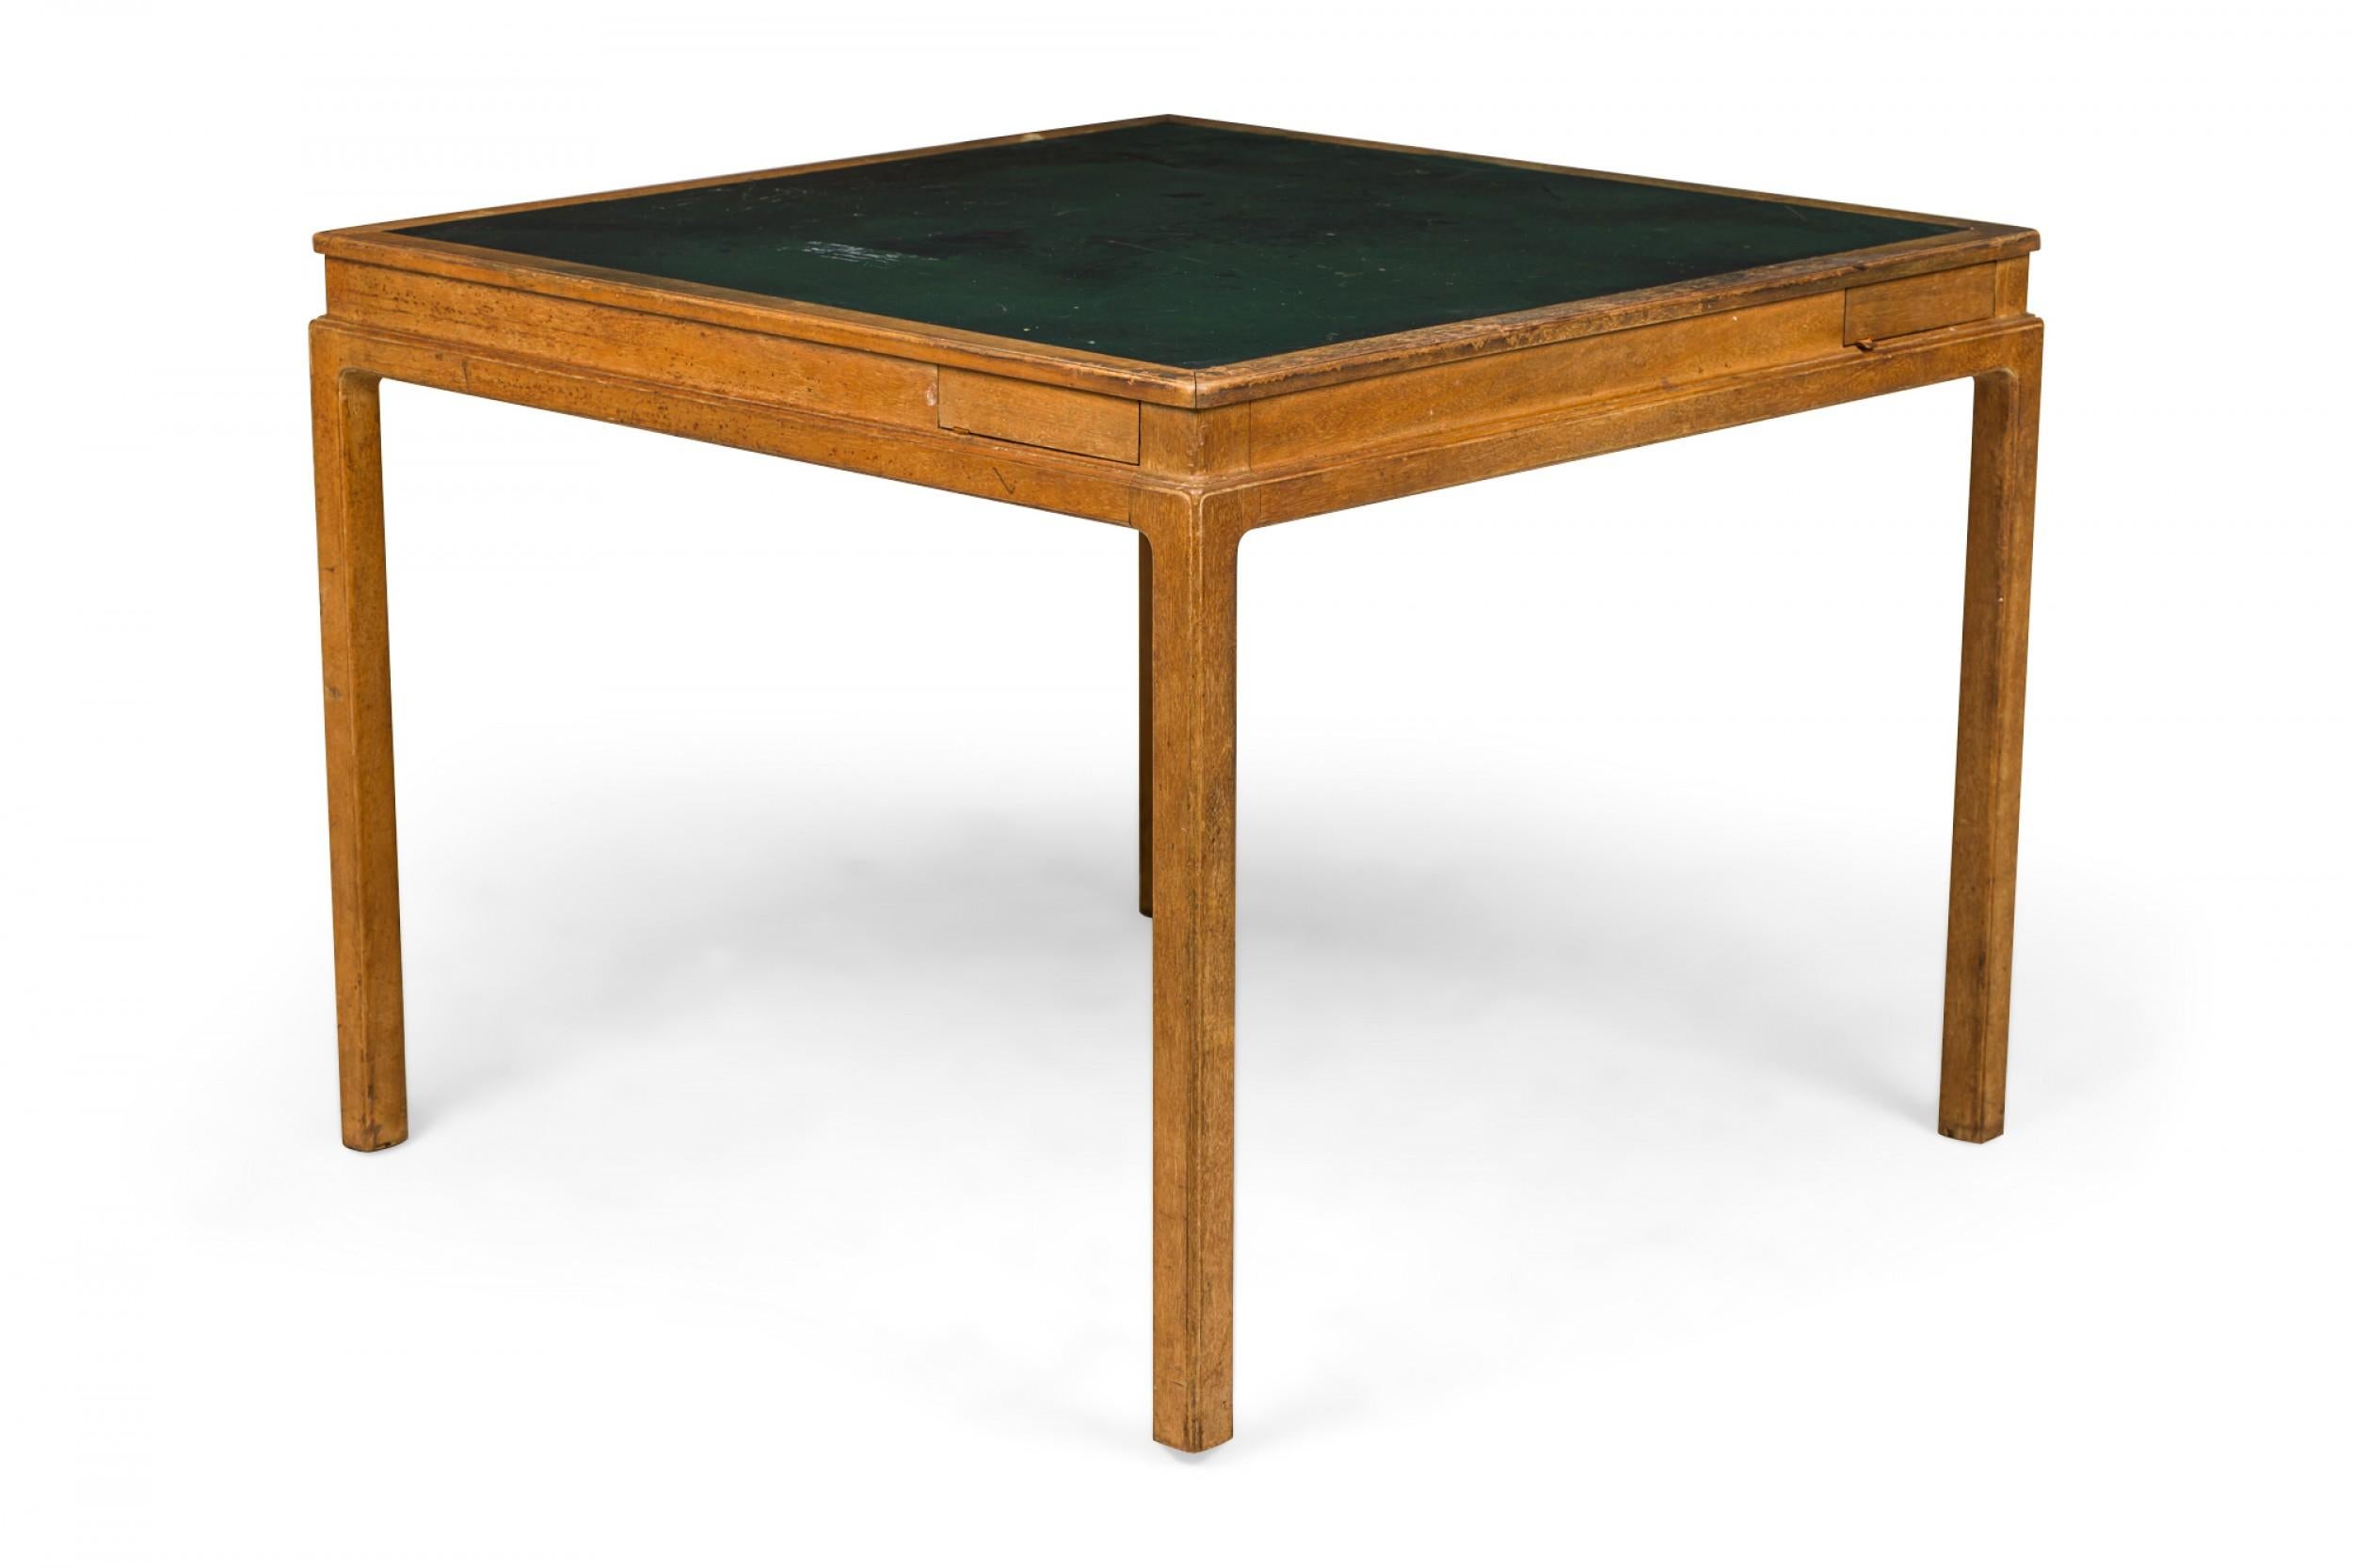 American mid-century game table with a wooden frame and a square inset green leather top, resting on four square wooden legs. (EDWARD J WORMLEY FOR DUNBAR FURNITURE COMPANY)